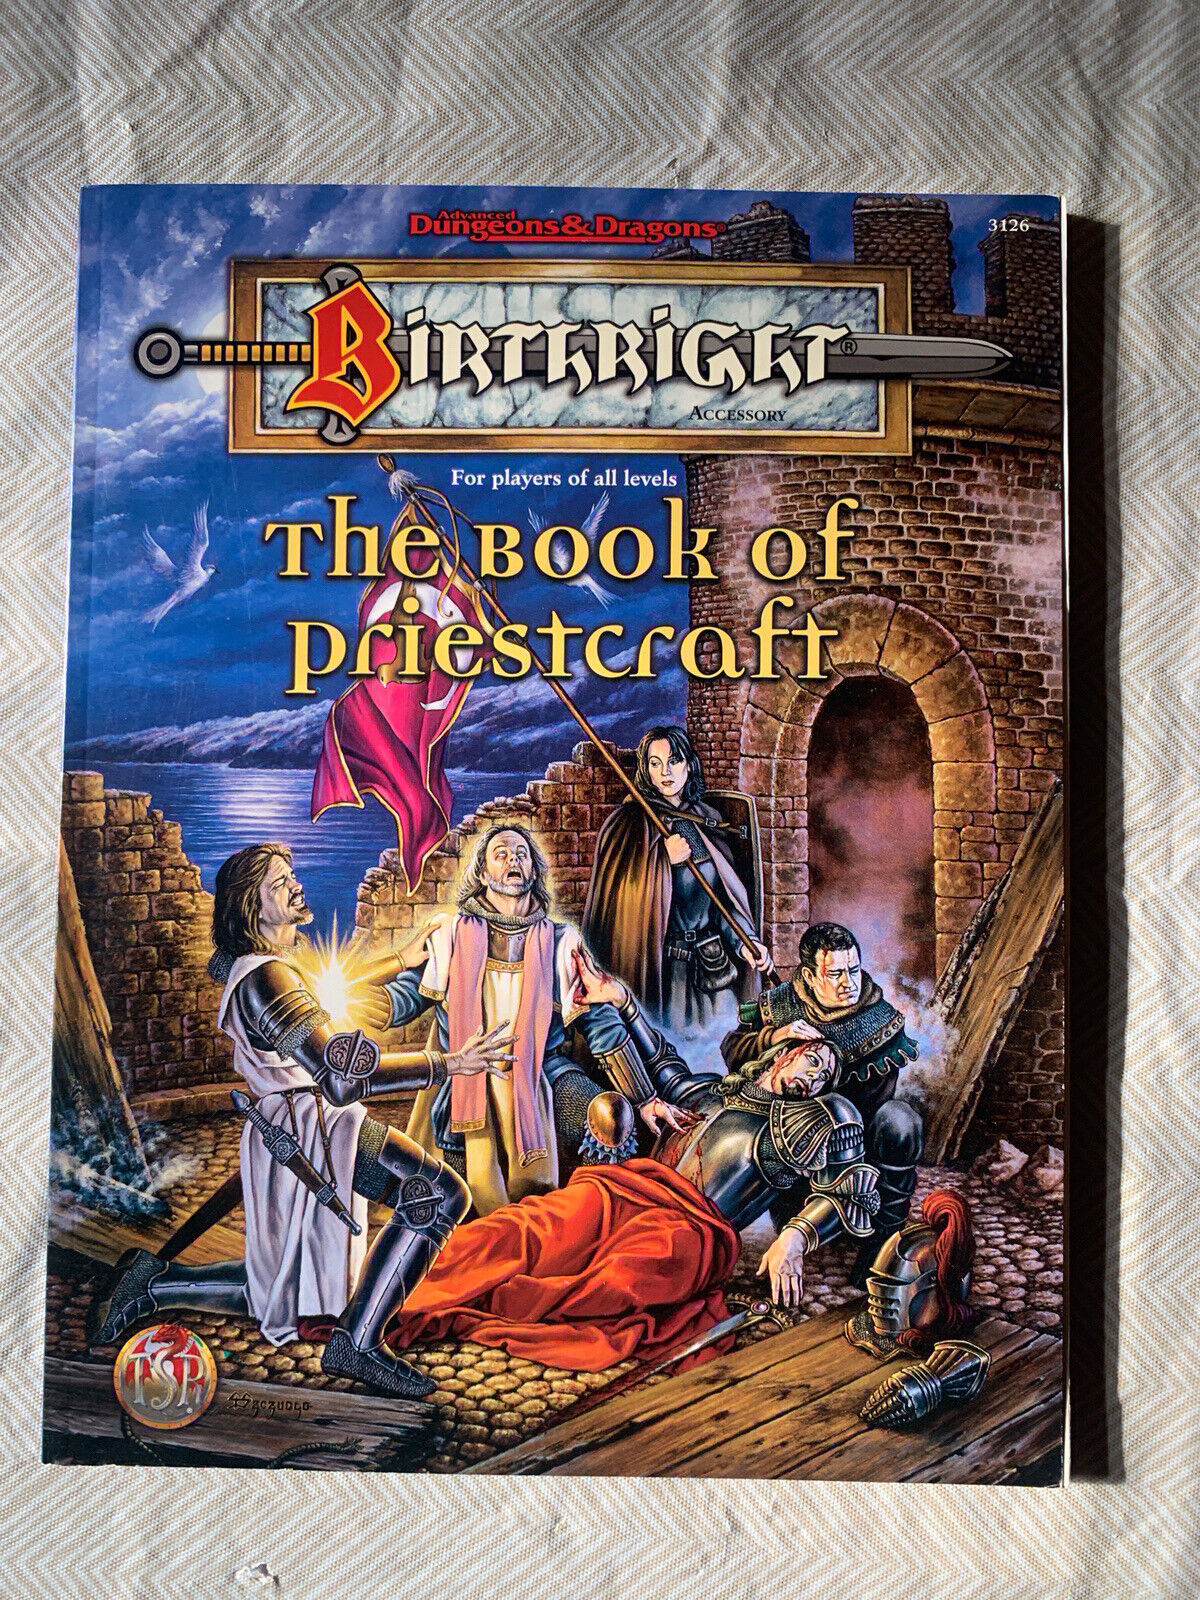 Dungeons & Dragons, D&d: Birthright - The Book Of Priestcraft (tsr 3126)